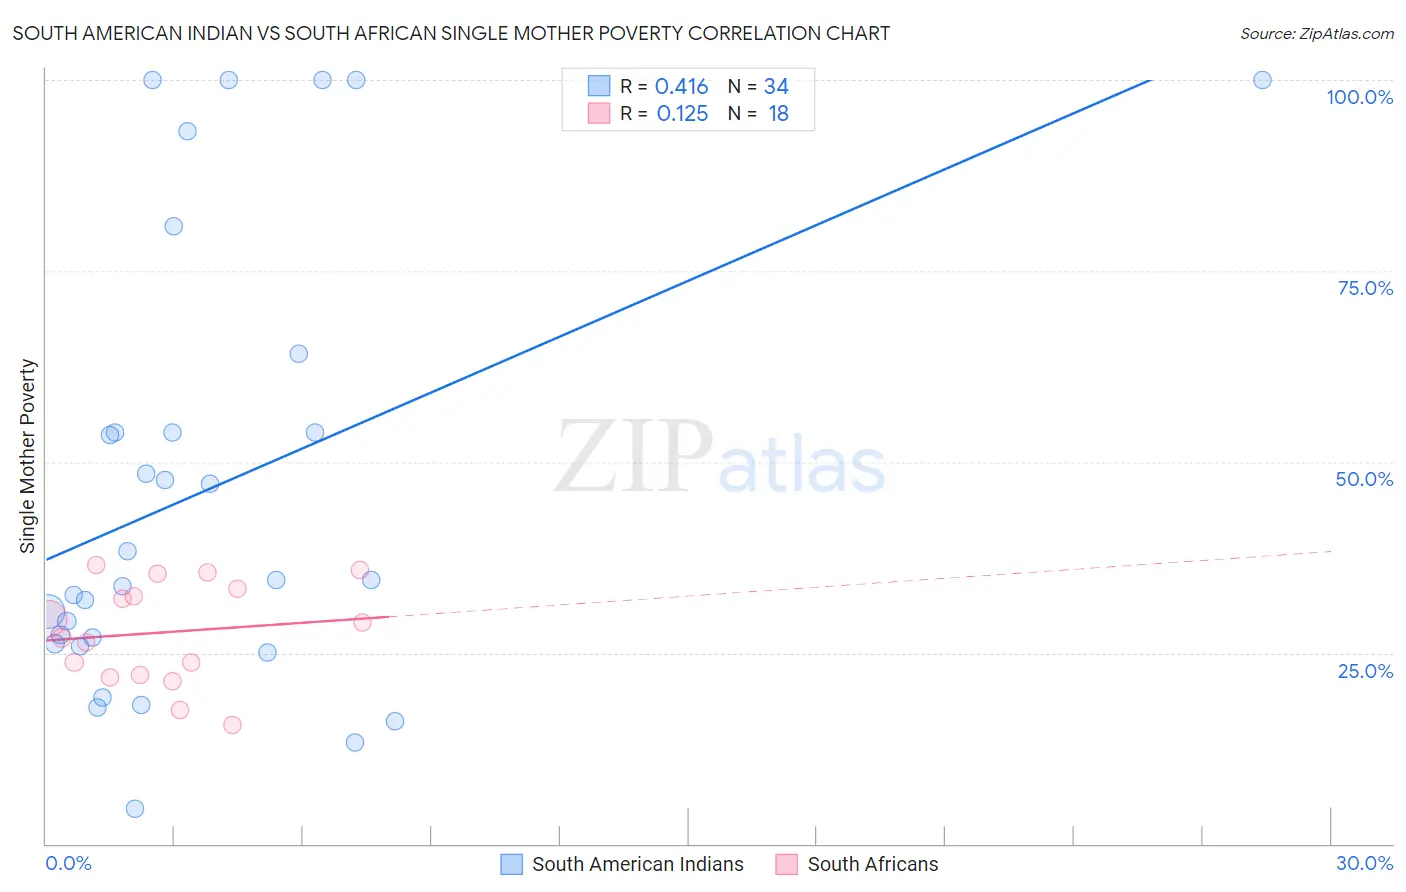 South American Indian vs South African Single Mother Poverty